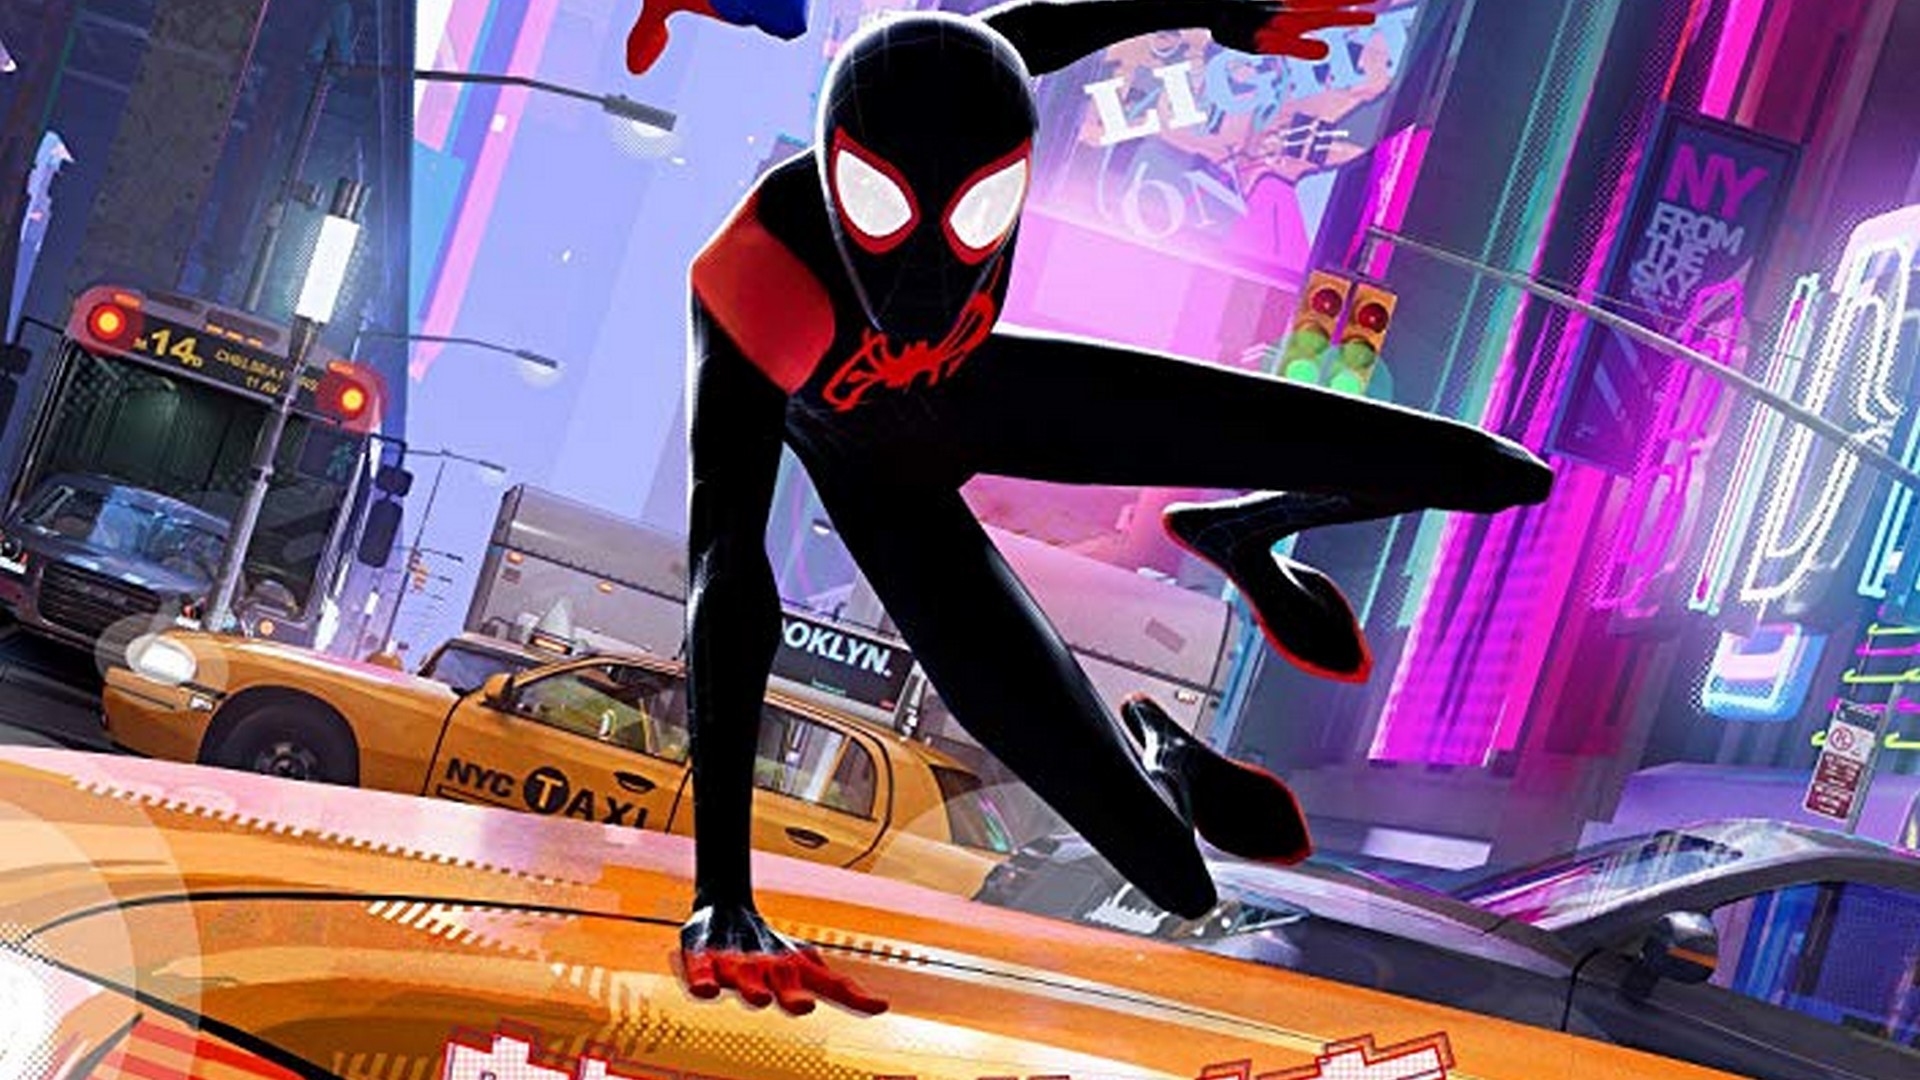 Spider-Man Into the Spider-Verse Wallpaper HD with image resolution 1920x1080 pixel. You can make this wallpaper for your Desktop Computer Backgrounds, Mac Wallpapers, Android Lock screen or iPhone Screensavers